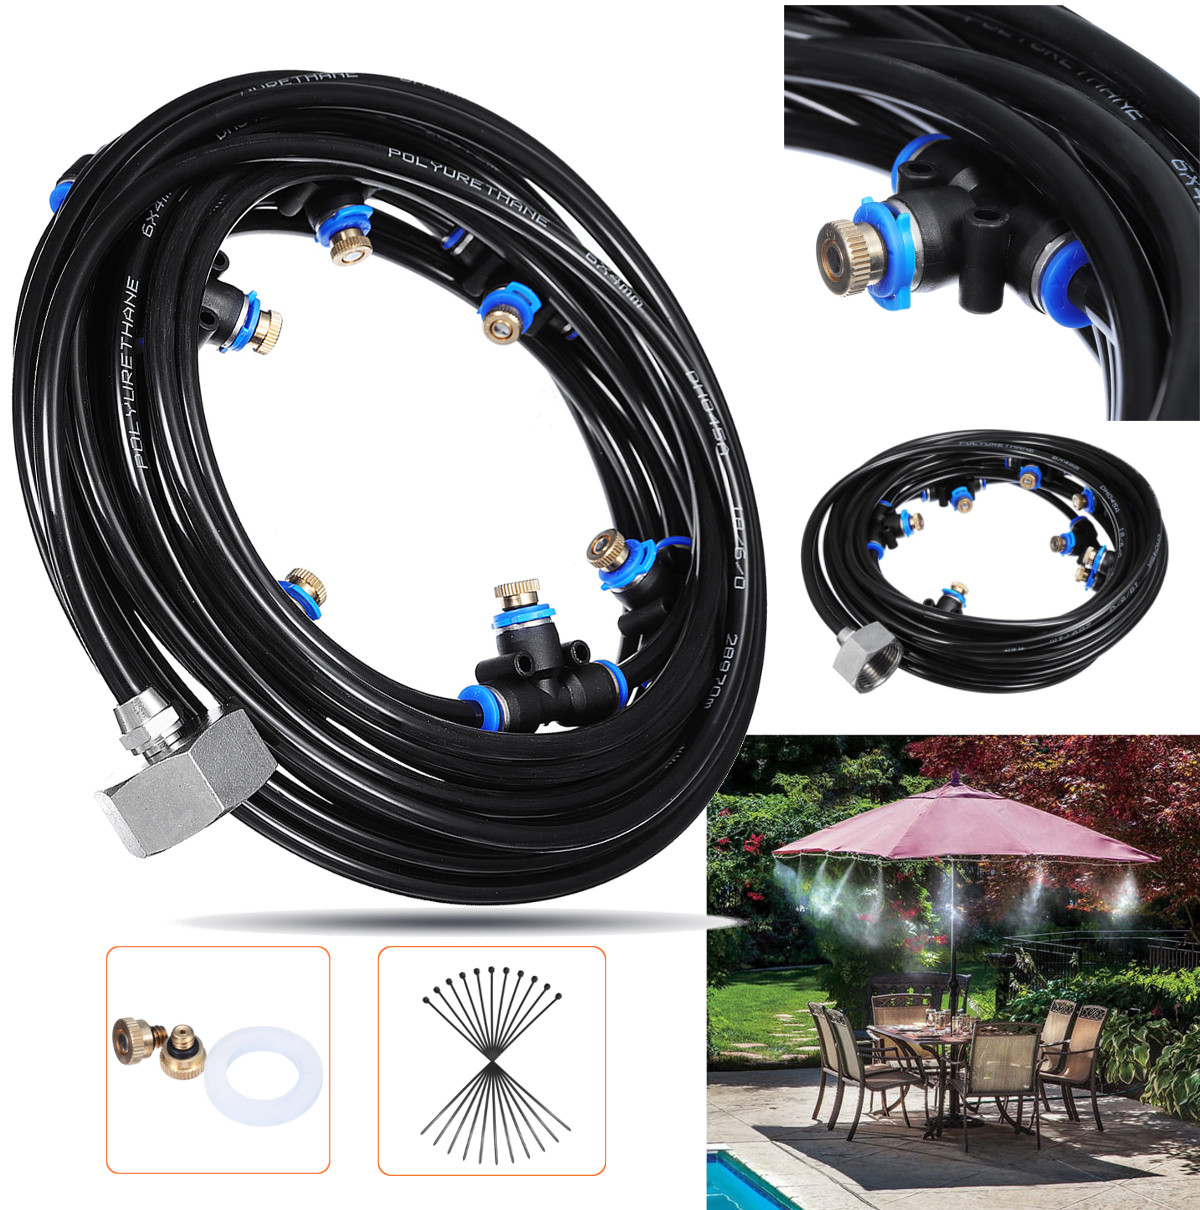 

20M+3M Outdoor Mist Coolant System Water Sprinkler Garden Patio Mister Cooling Spray Kits Micro Irrigation Set With 36 S